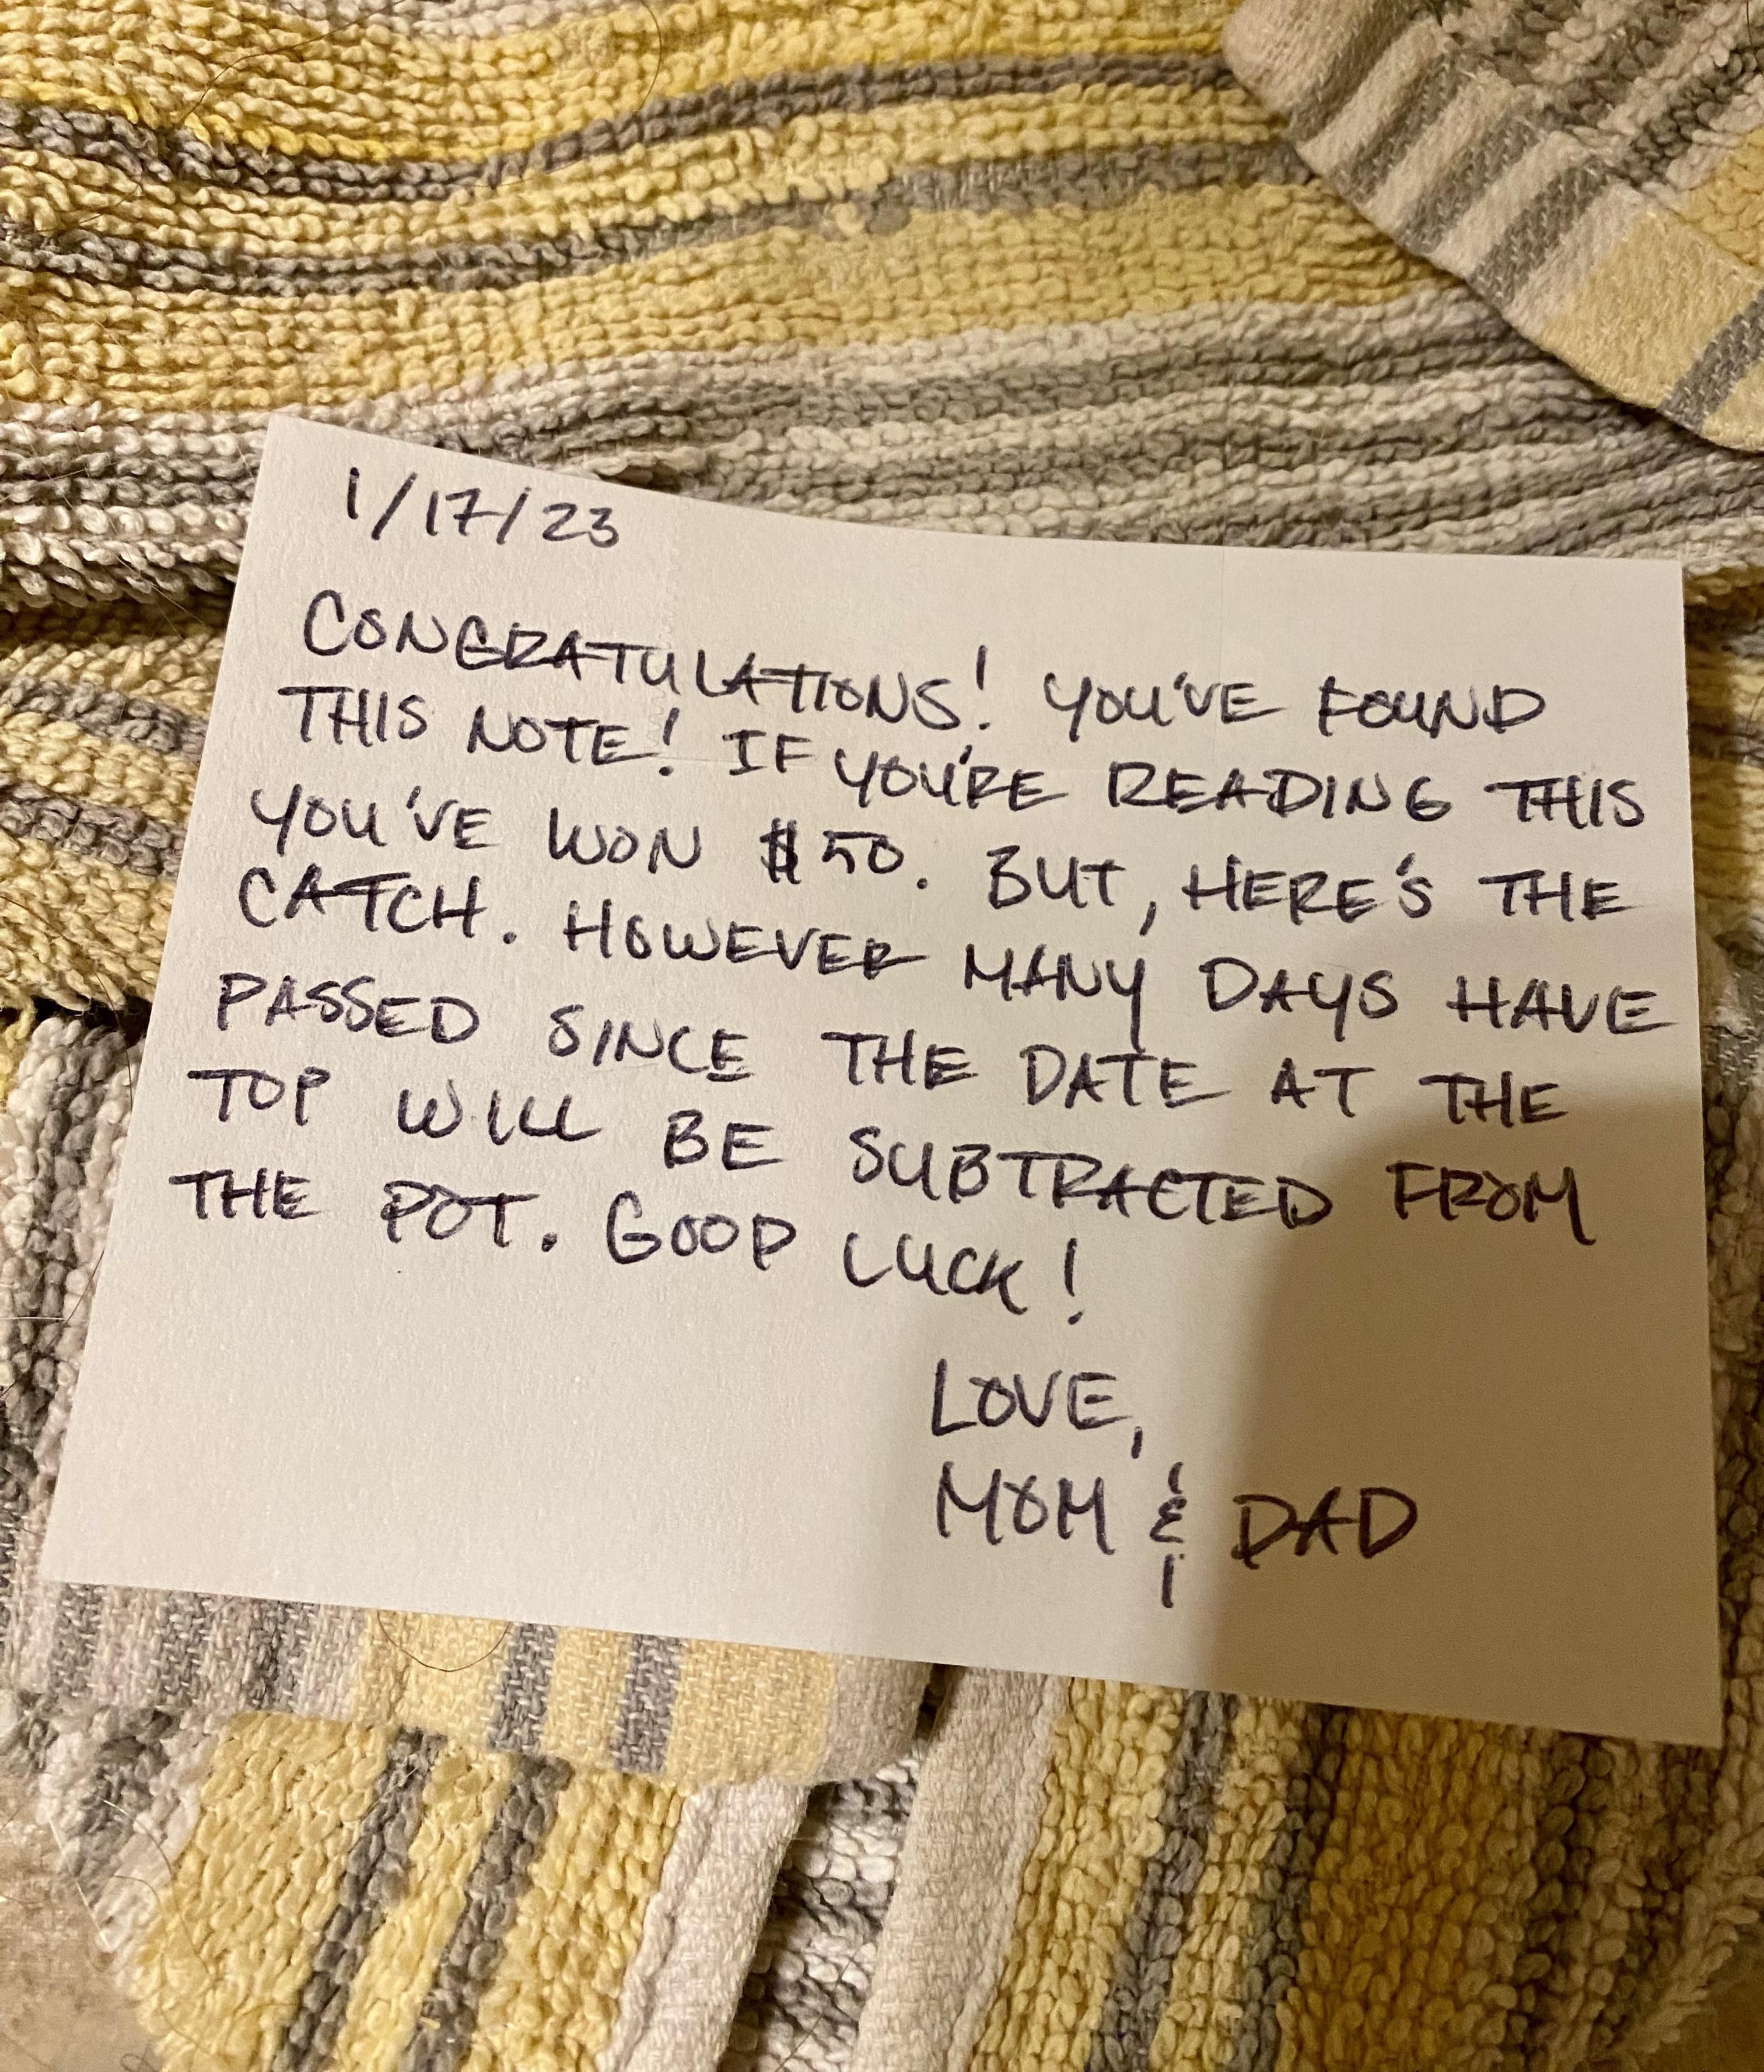 My kids haven’t cleaned their bathroom like they were supposed to. I decided to leave a note under a rag they left on the floor. Let’s see if they find it. It’s been a week already.